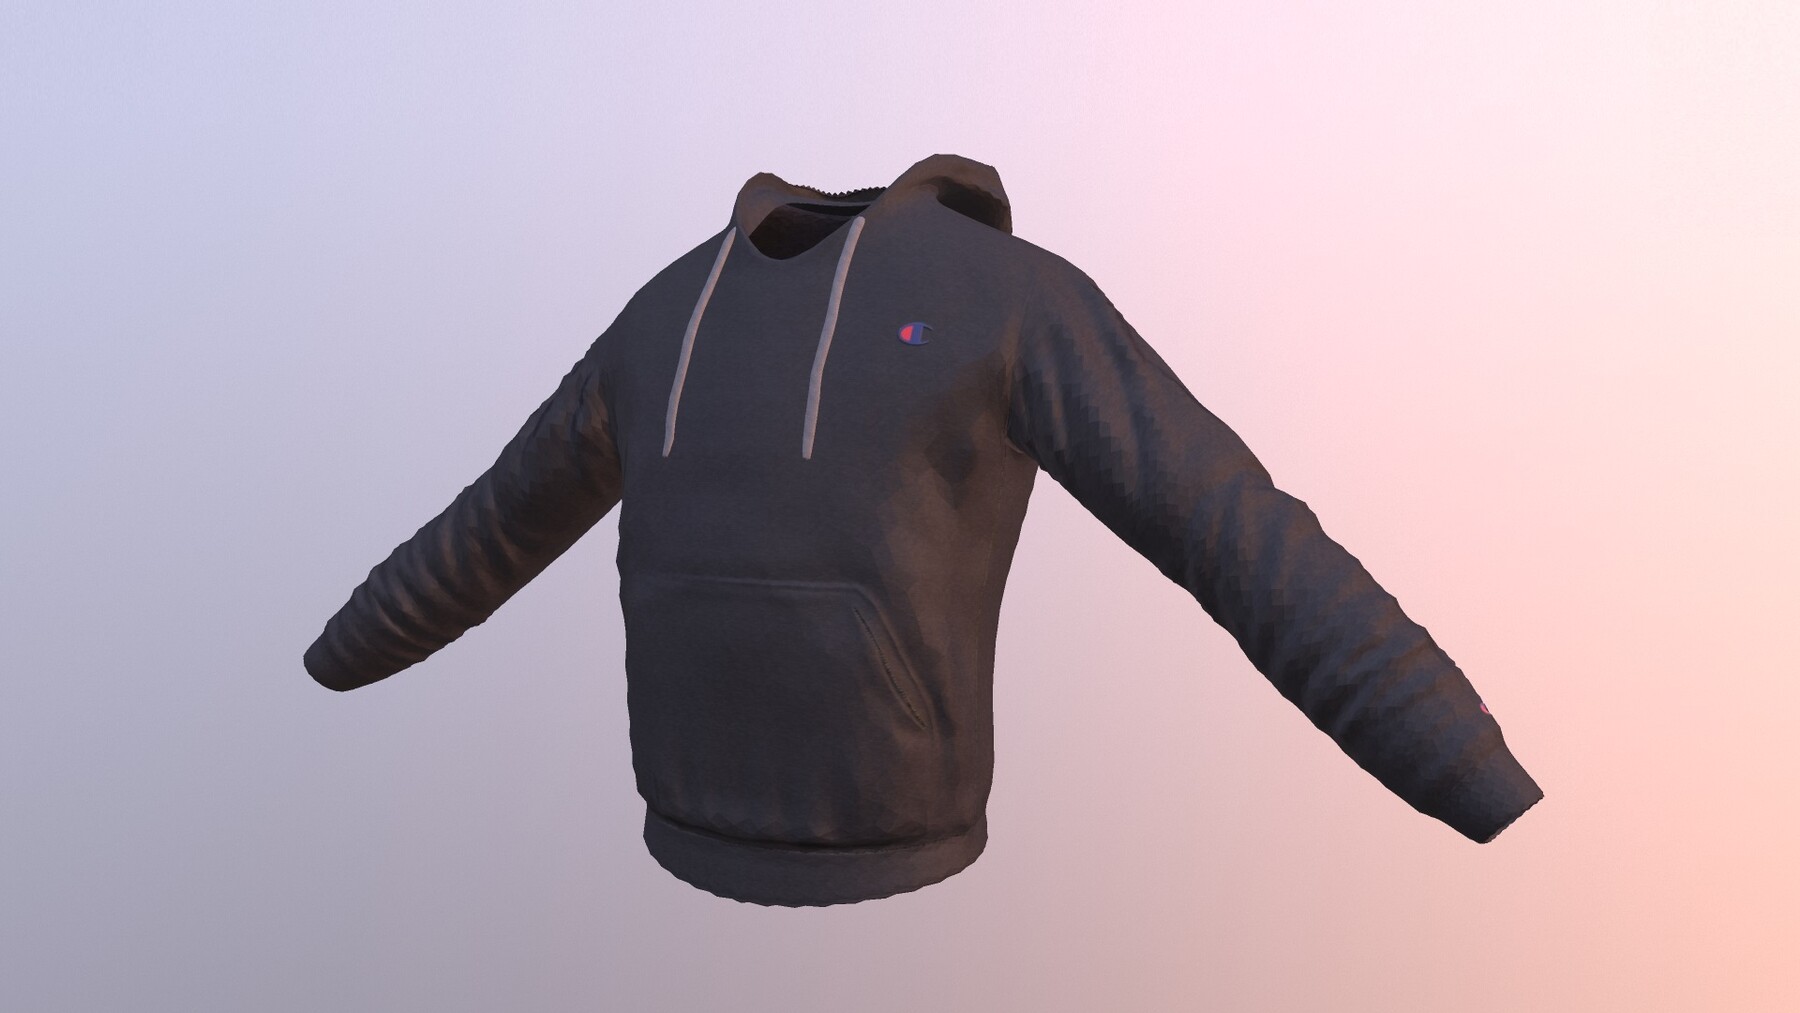 ArtStation - CHAMPION HOODIE low-poly PBR | Game Assets